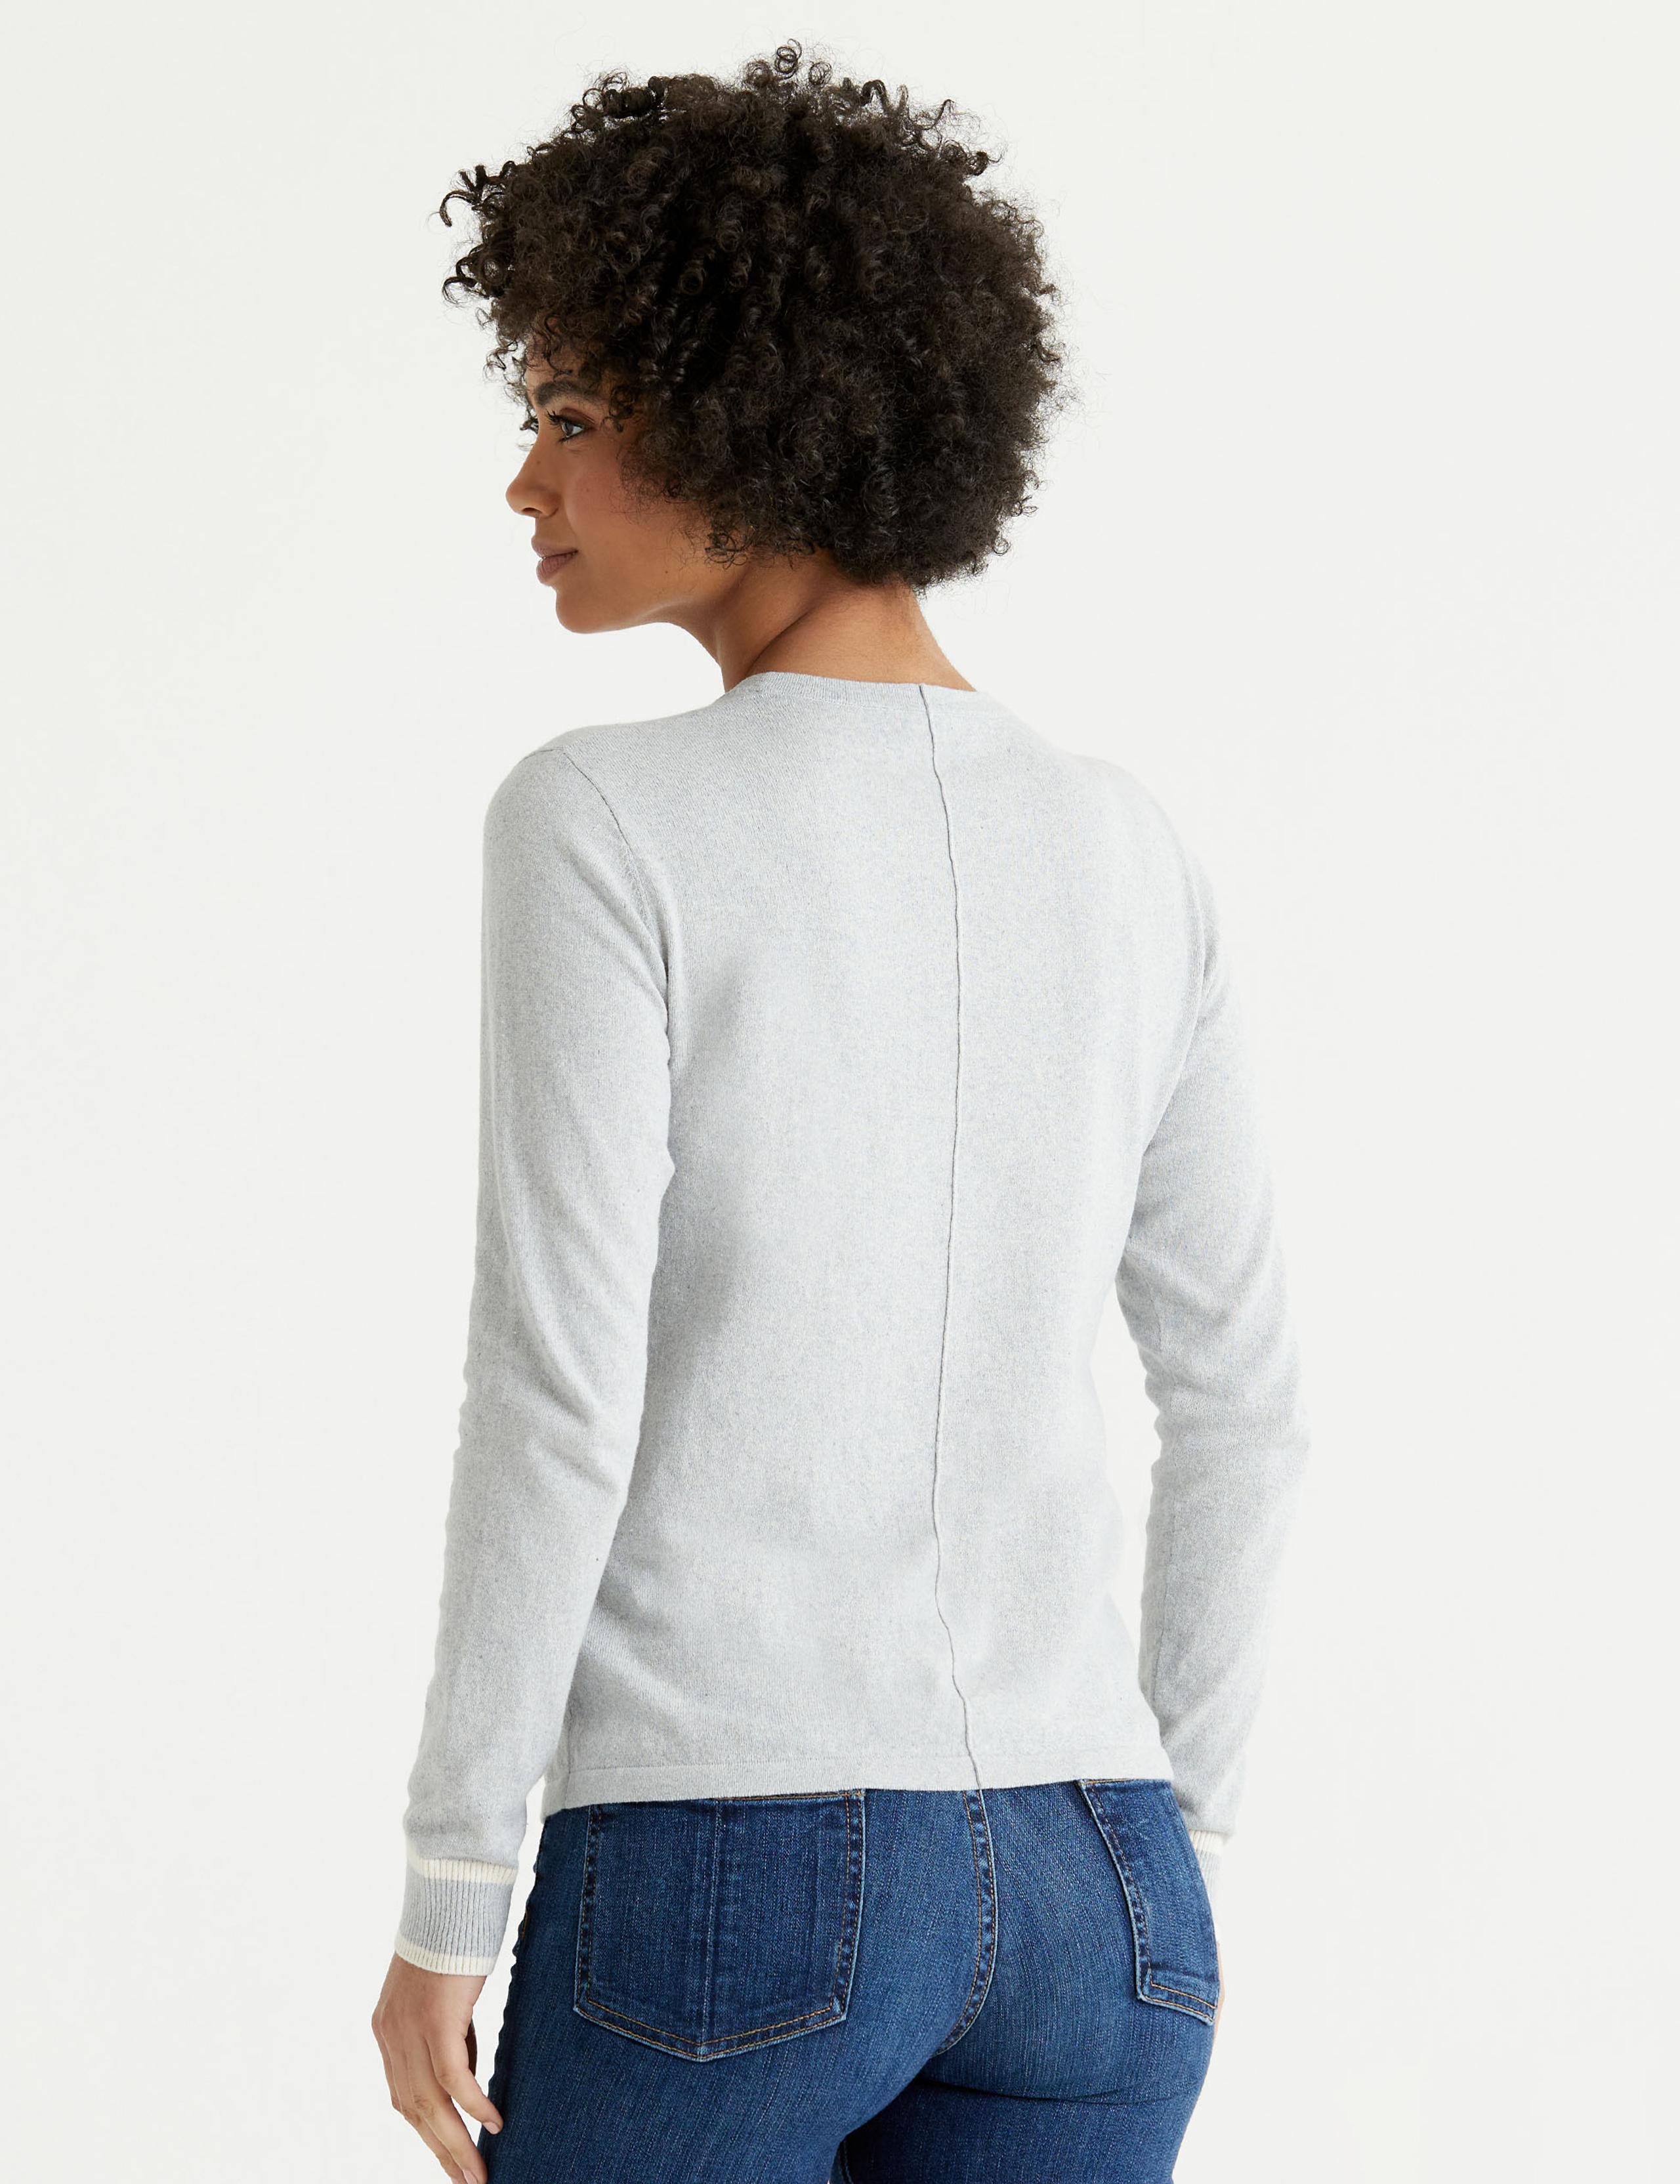 Back view of woman wearing Bay Sweater in Marino Blue